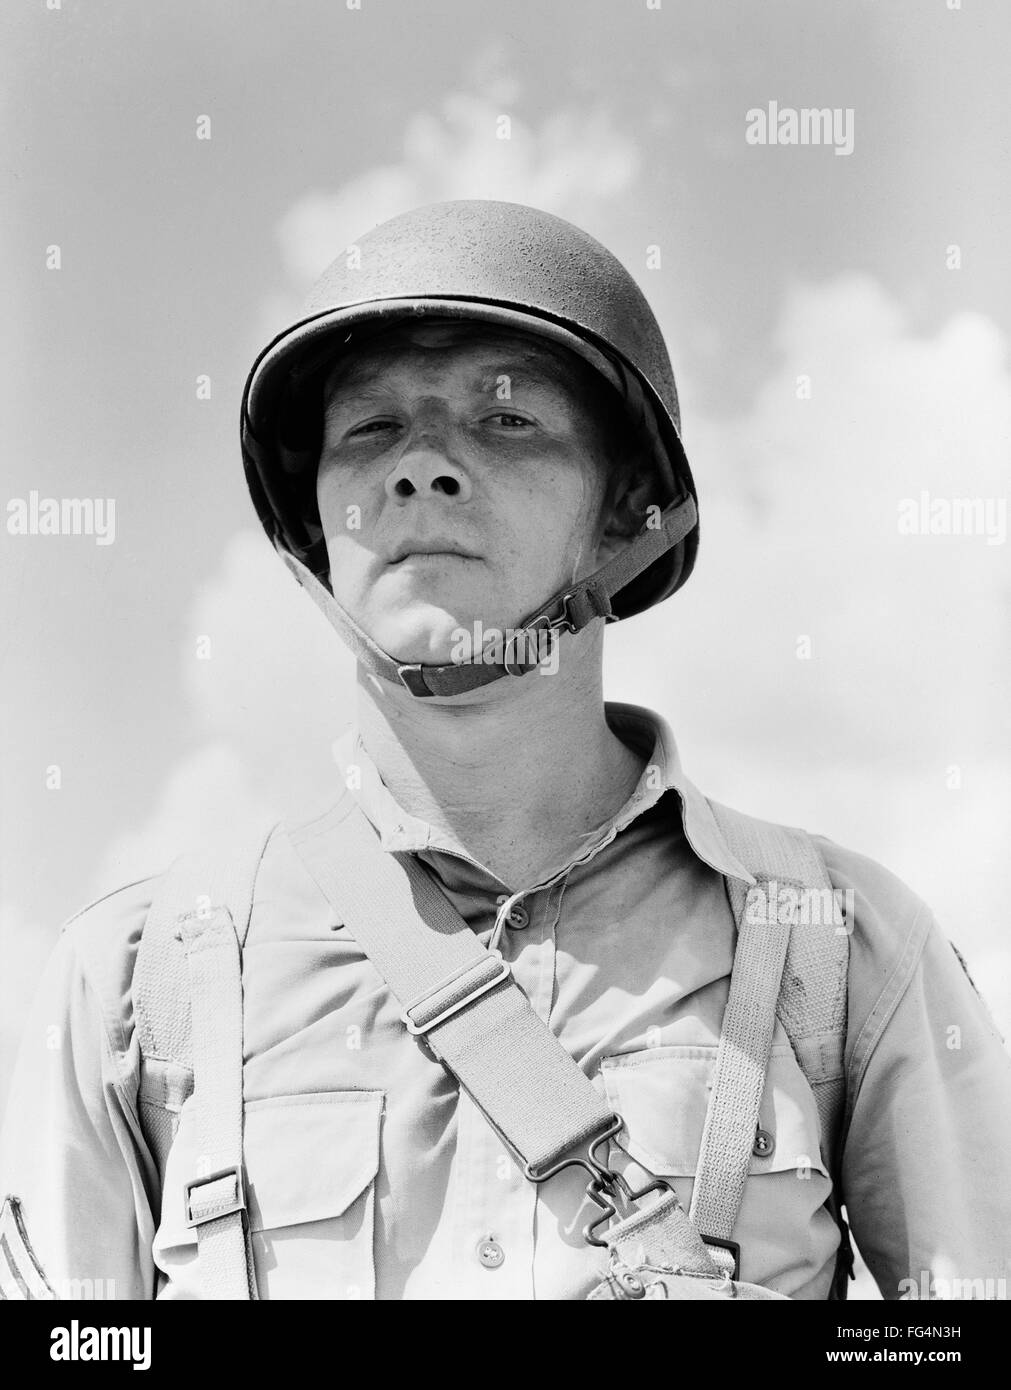 PARATROOPER, 1942. /nPortrait of a U.S. Army paratrooper. Photograph by Arthur Rothstein, 1942. Stock Photo